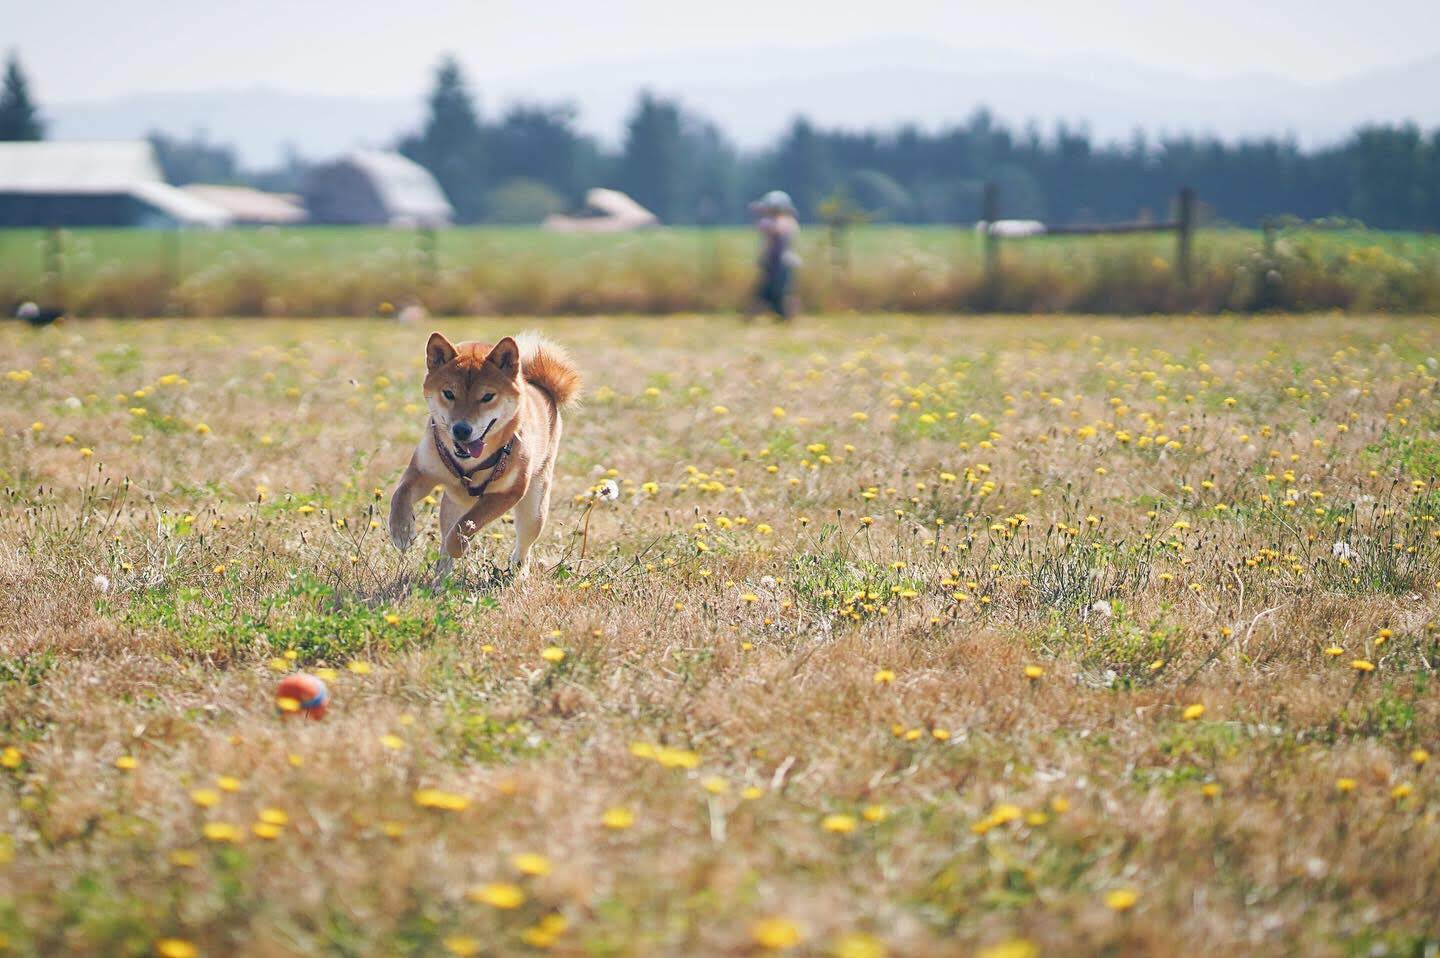 A photo of my dog running in a field.